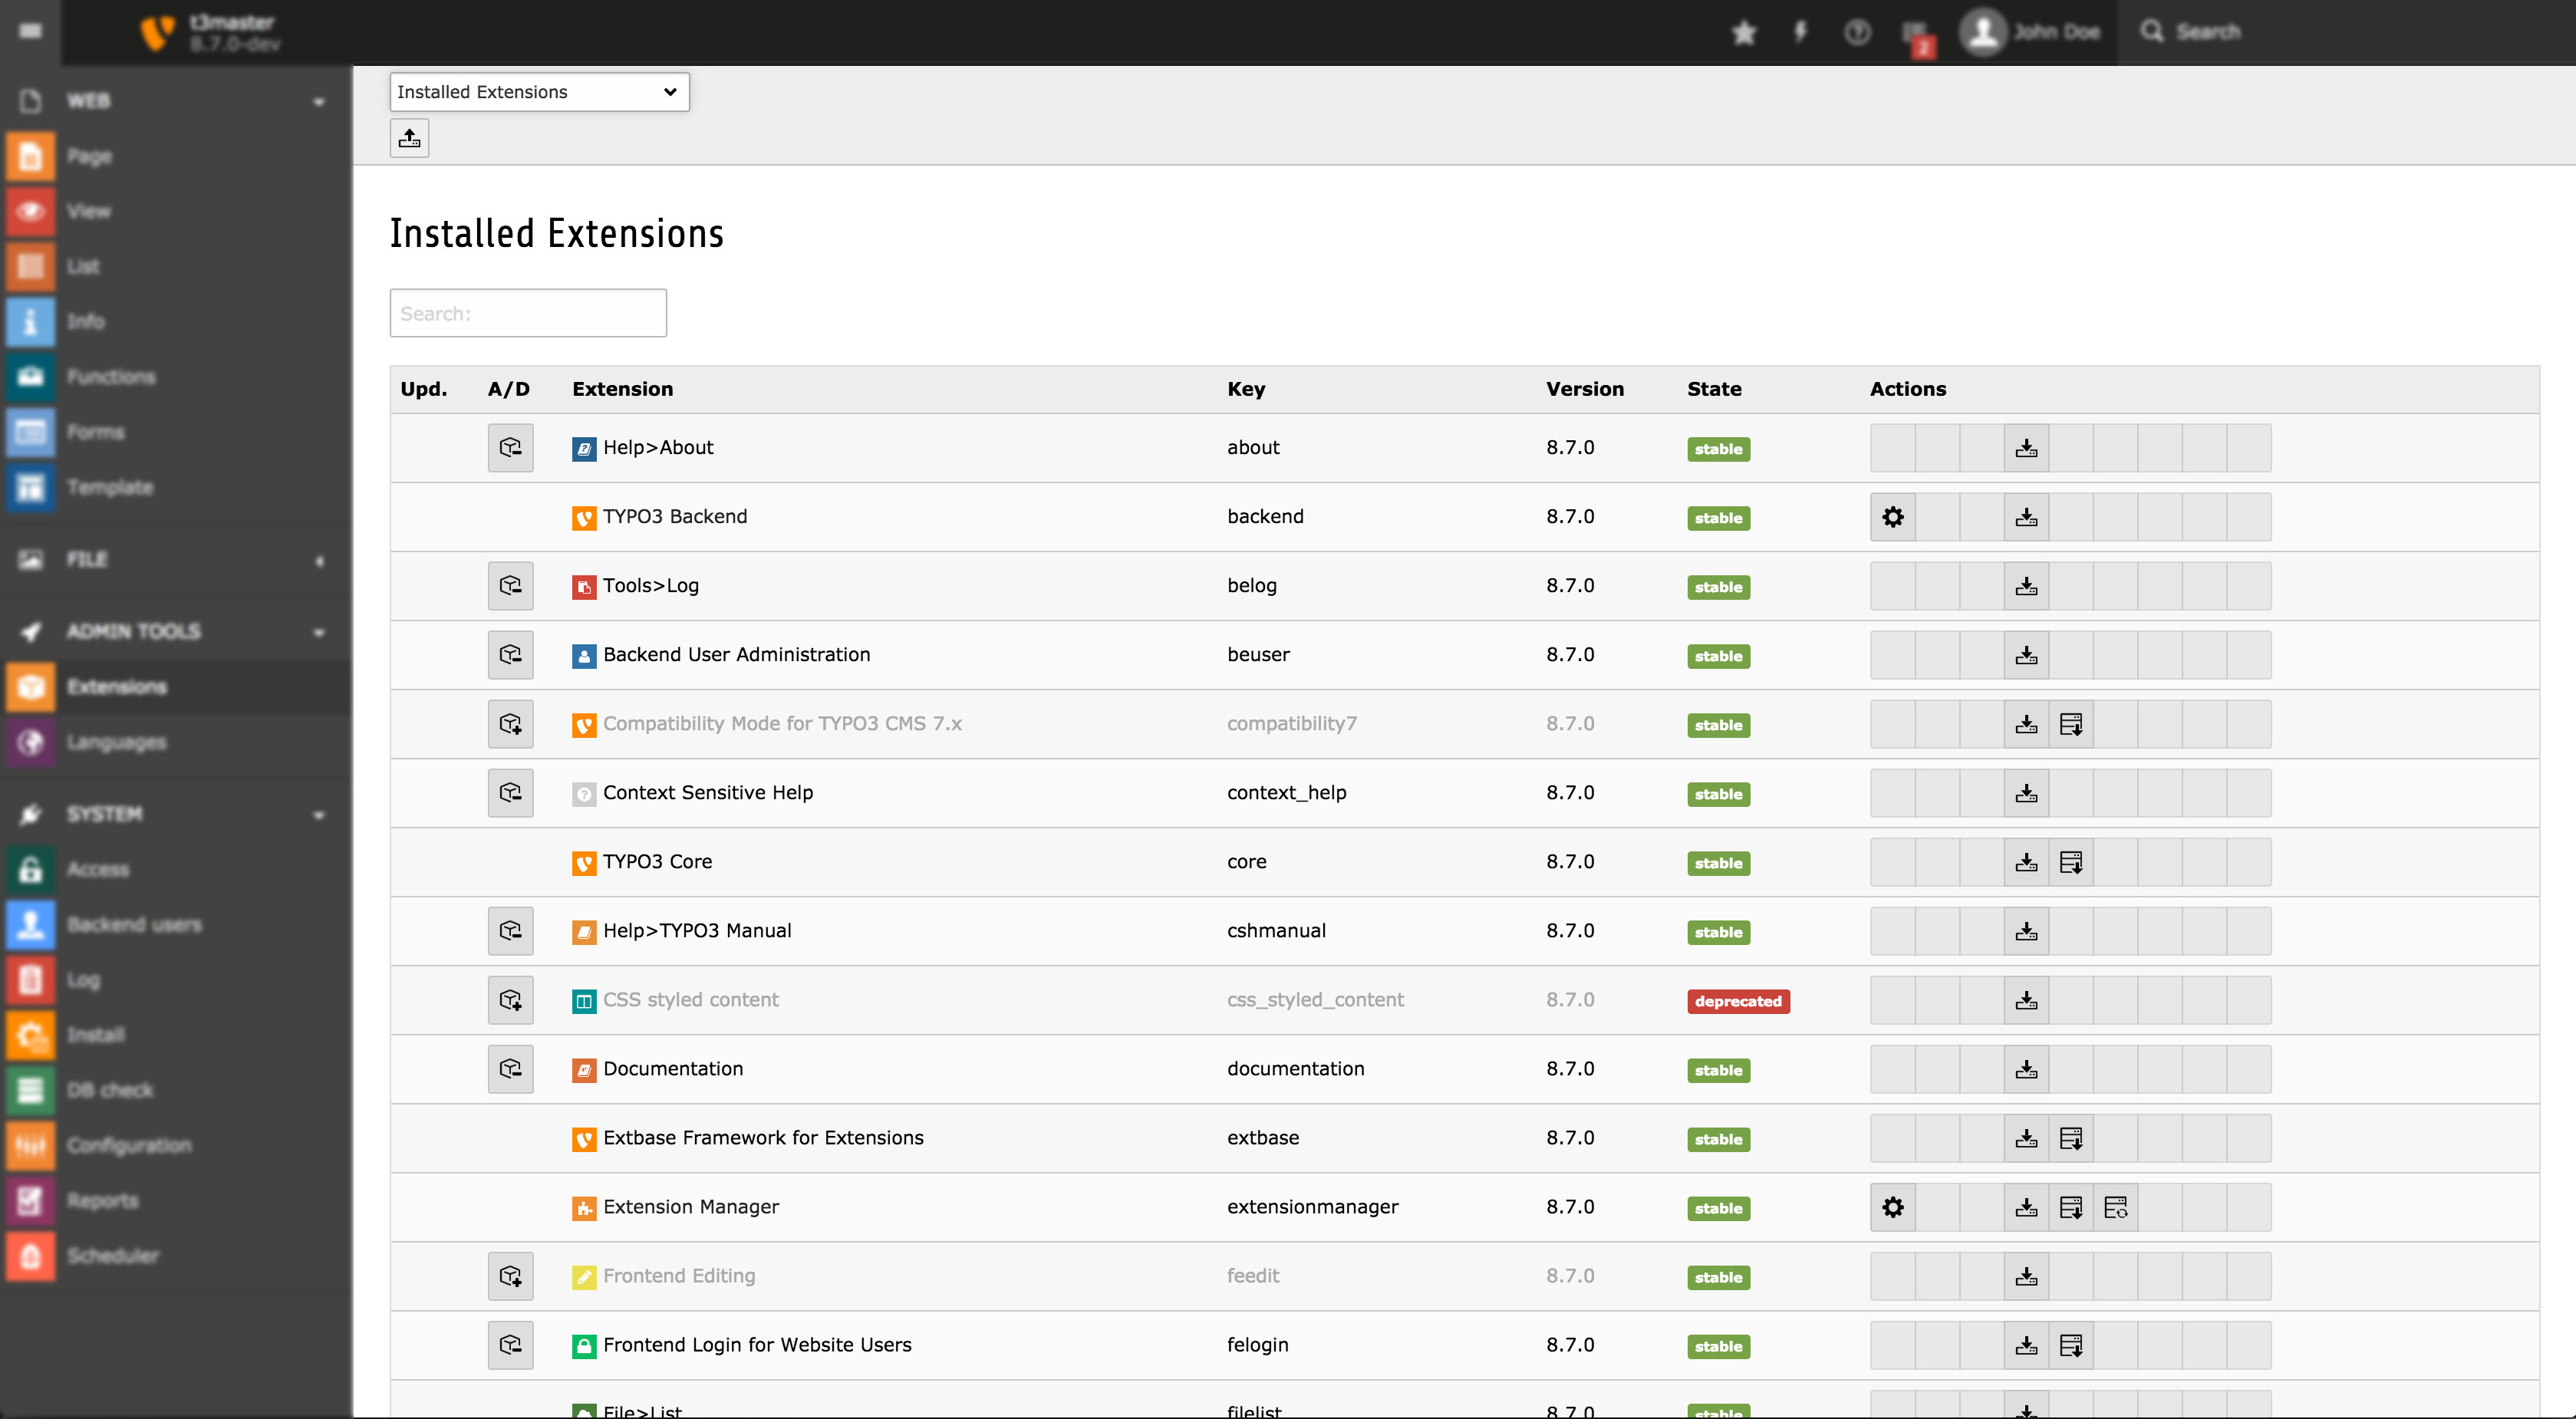 The Extension Manager (from TYPO3 7.6 to TYPO3 8.7)